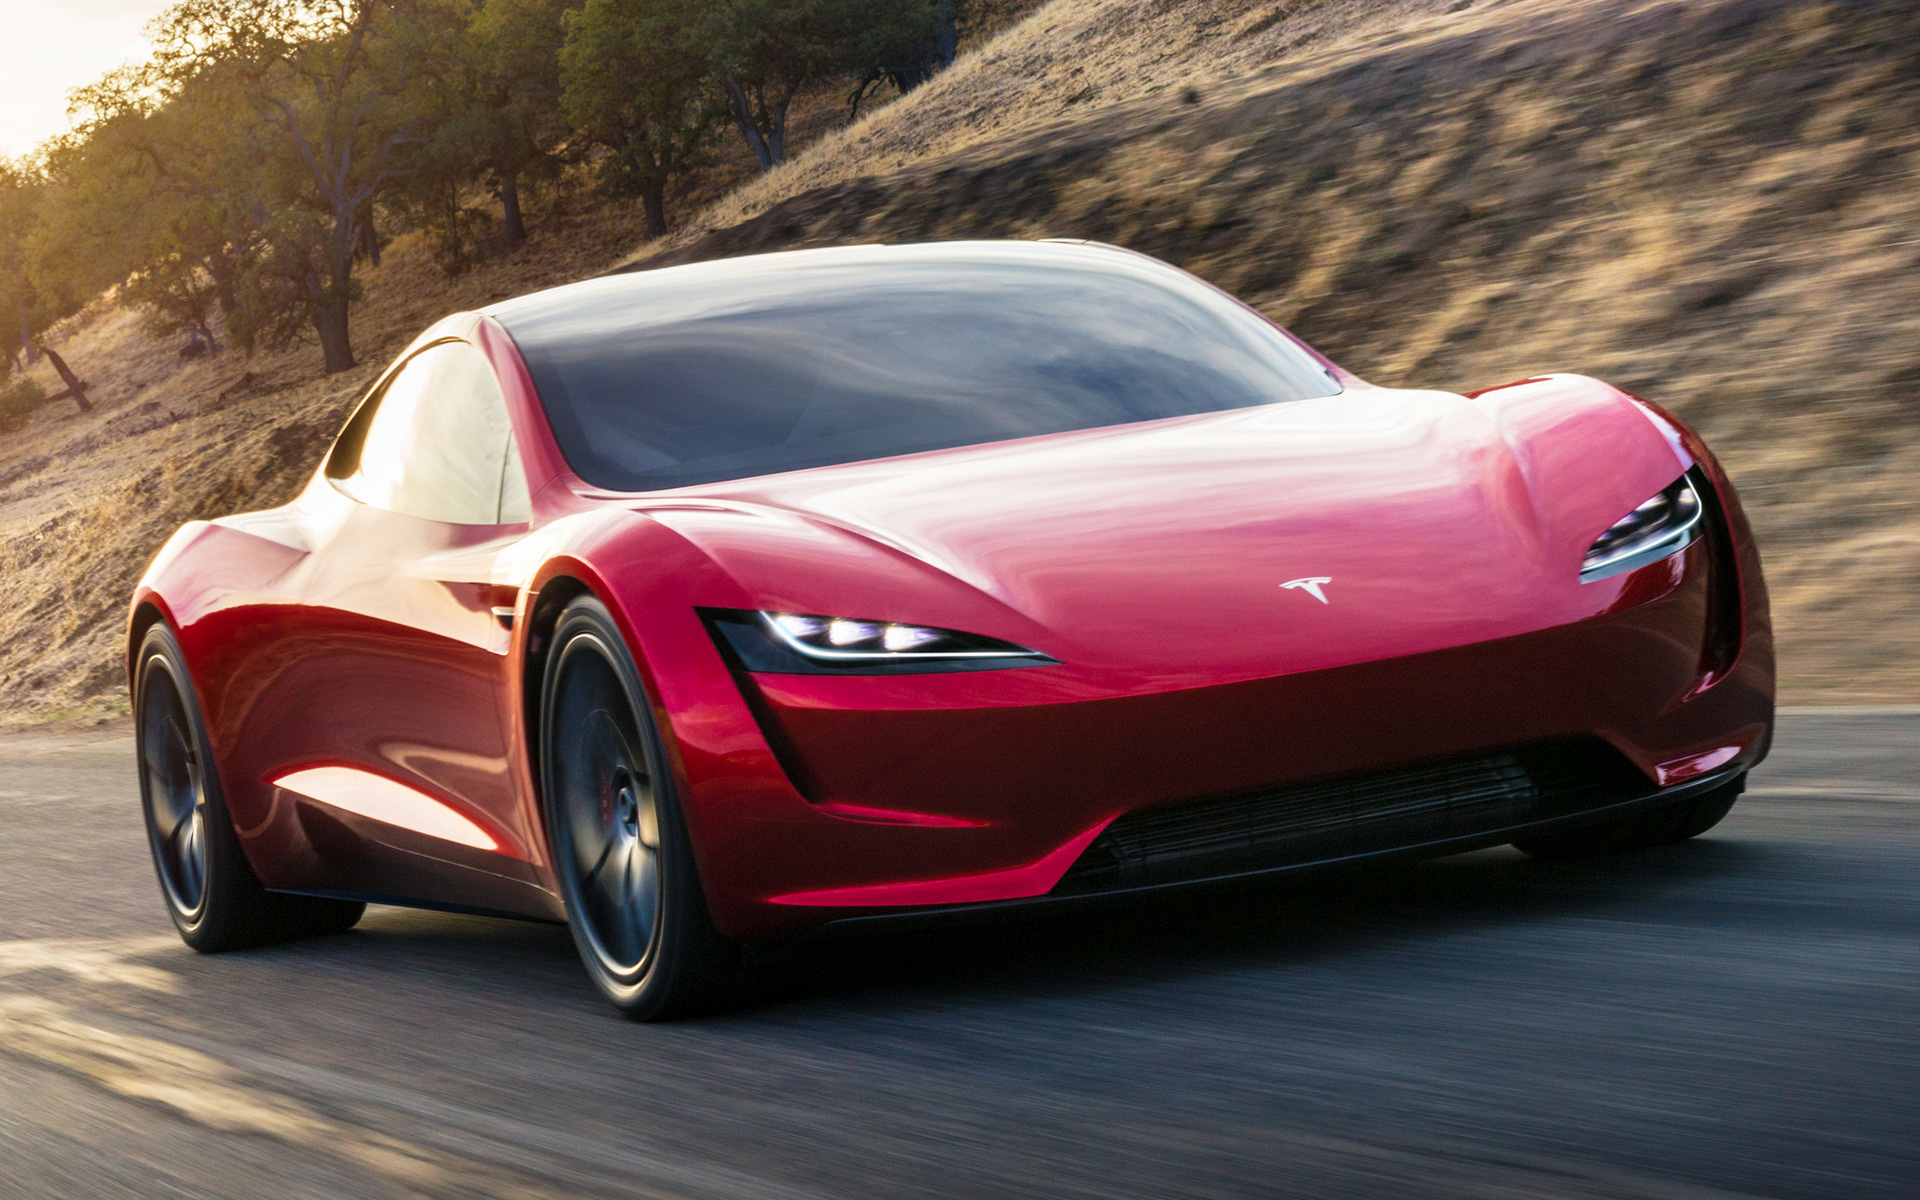 2019 Tesla Roadster - Wallpapers and HD Images | Car Pixel